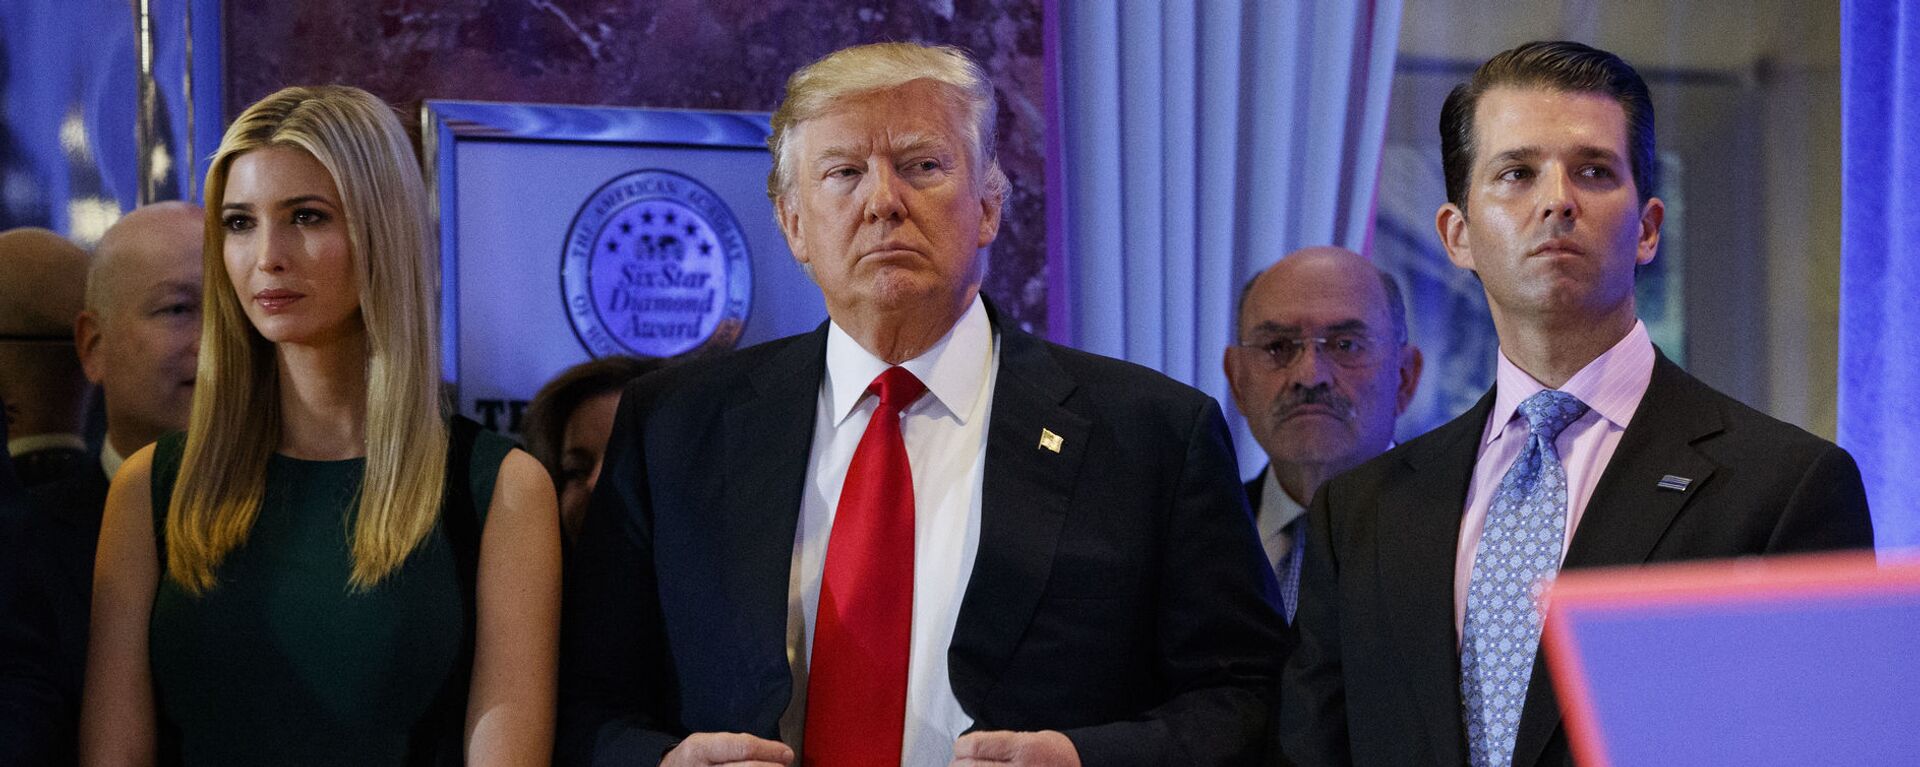 In this Jan. 11, 2017, photo, President-elect Donald Trump, center, stands next to Allen Weisselberg, second from left, Donald Trump Jr., right and Ivanka Trump, left, at a news conference in the lobby of Trump Tower in New York - Sputnik International, 1920, 19.01.2022